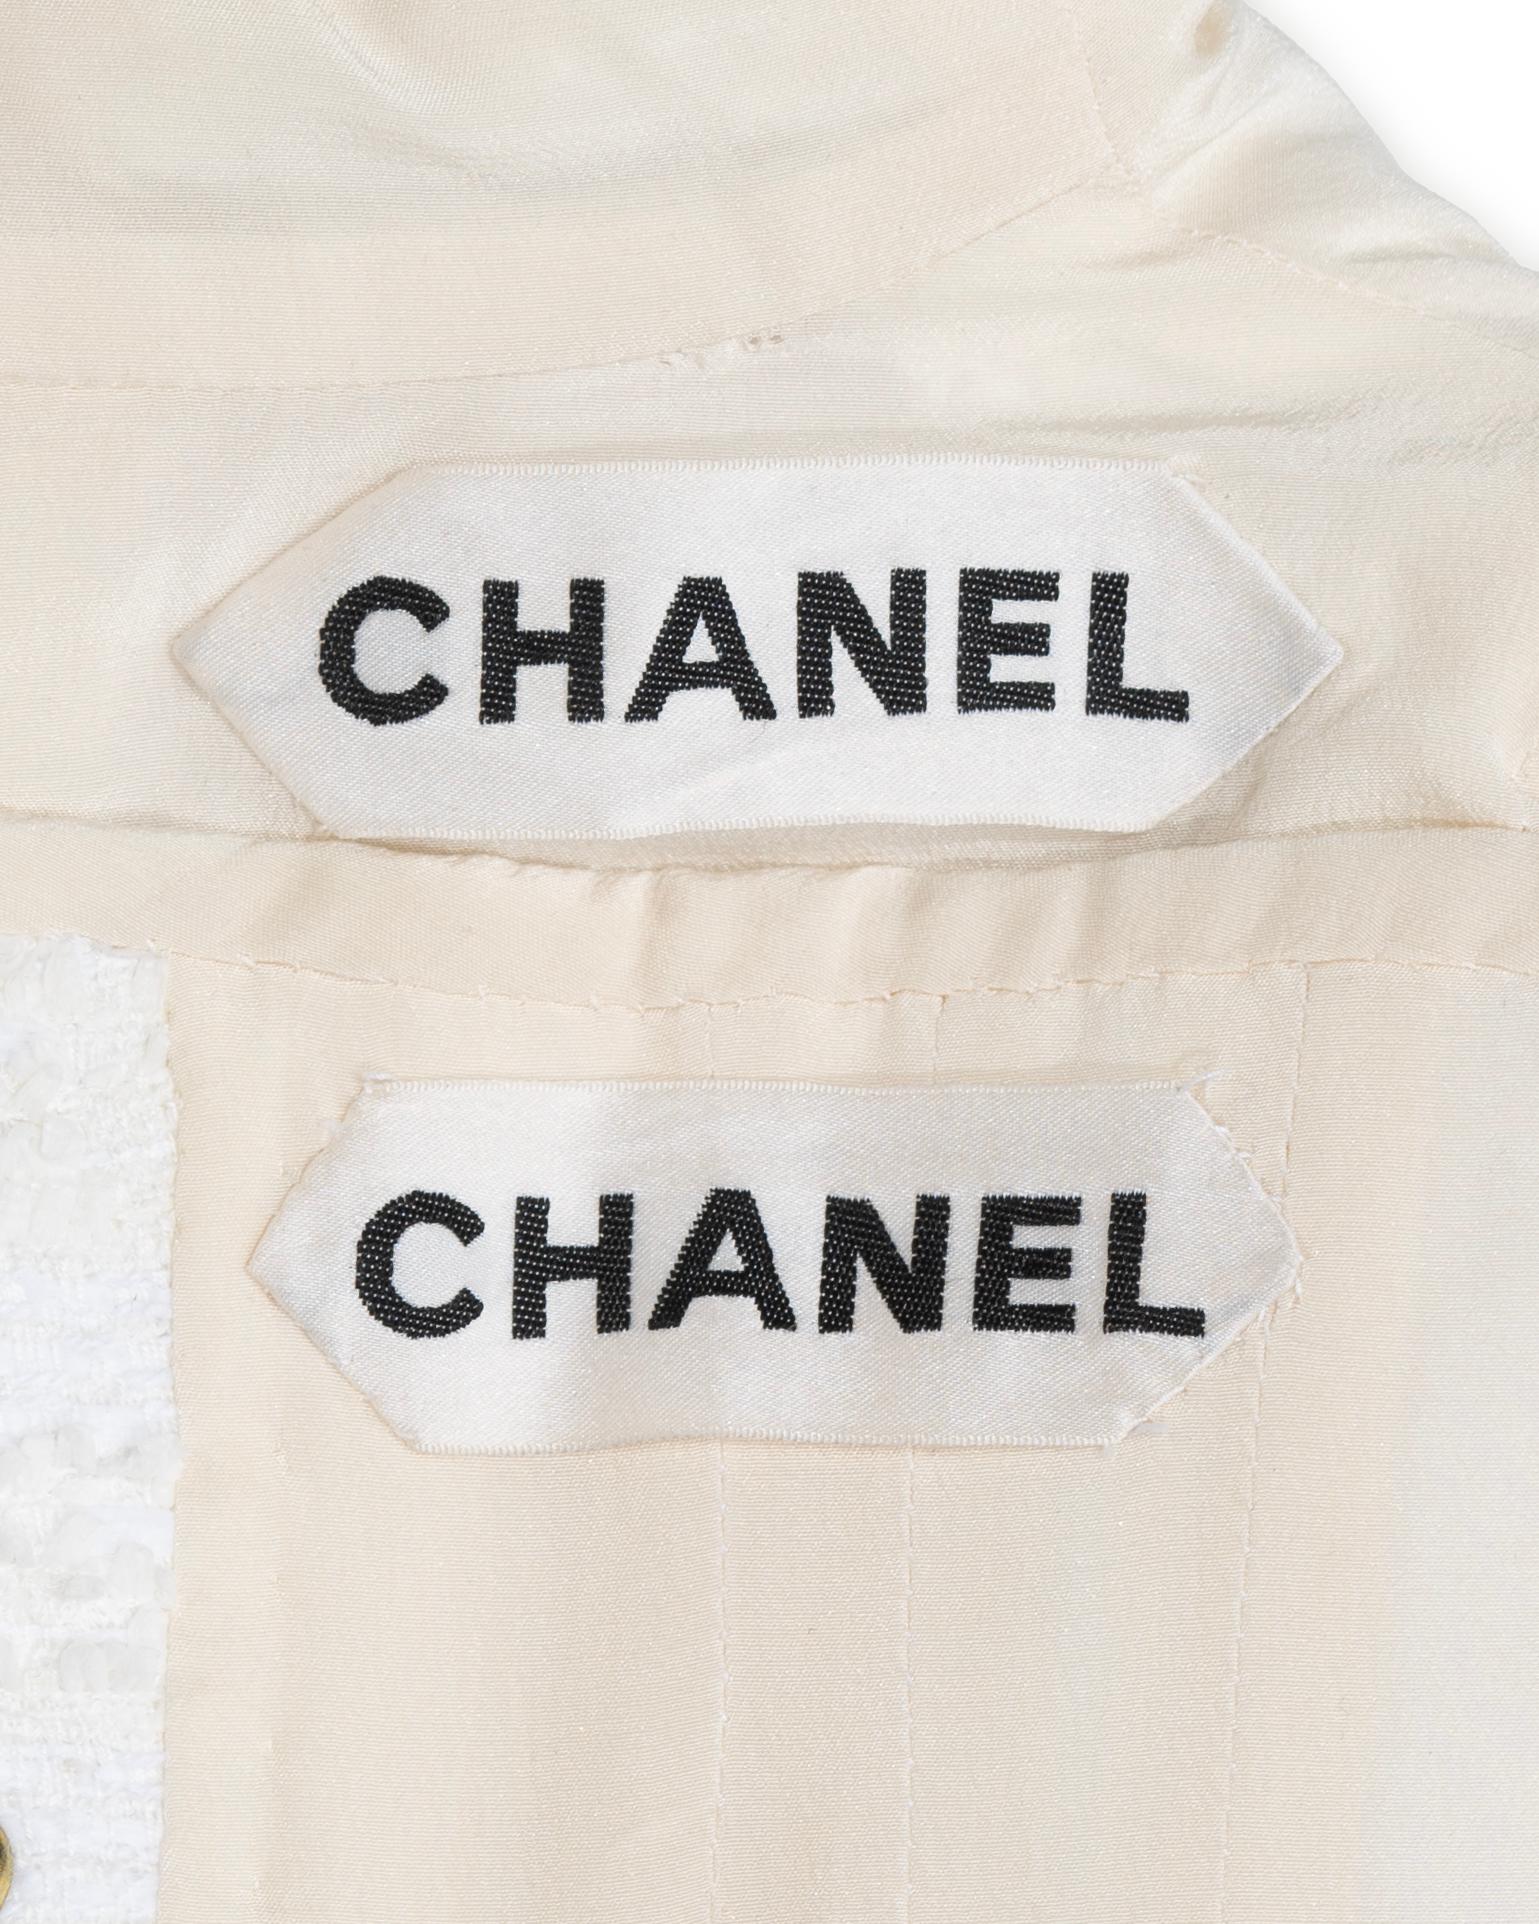 Chanel by Karl Lagerfeld Haute Couture White Bouclé Corseted Skirt Suit, ss 2014 For Sale 13